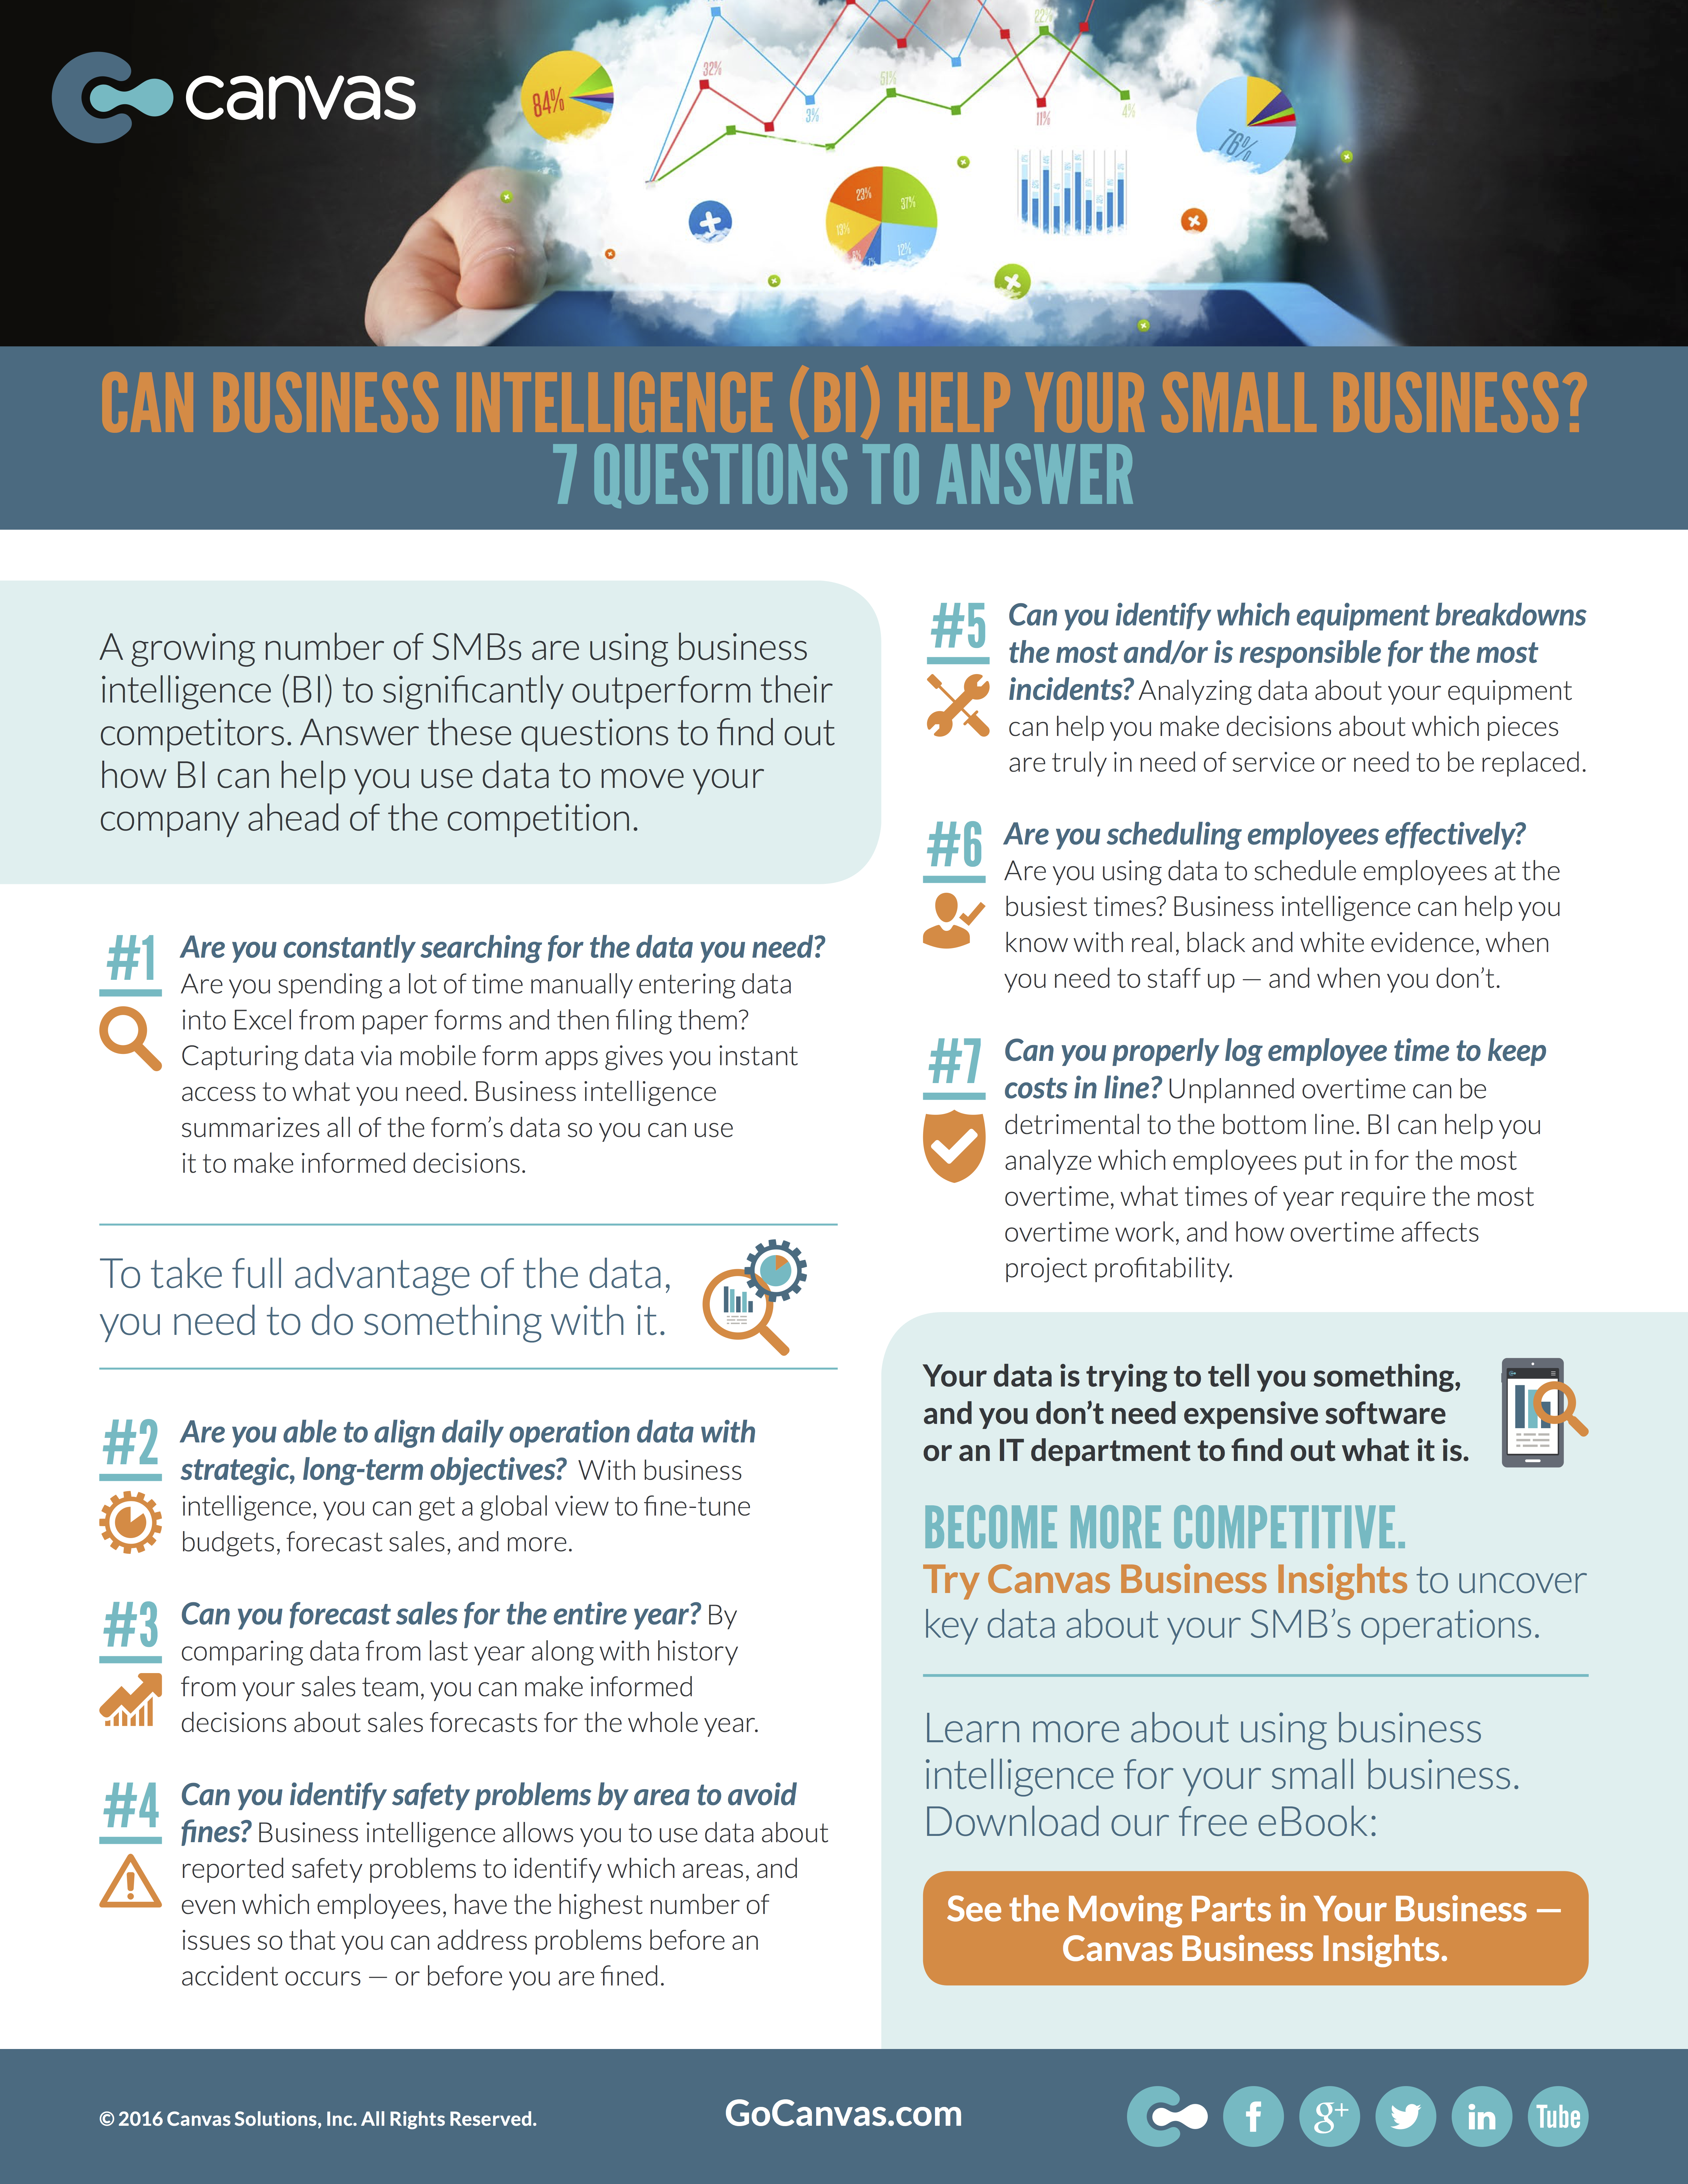 Can Business Intelligence Help Your Small Business? 7 Questions to Answer